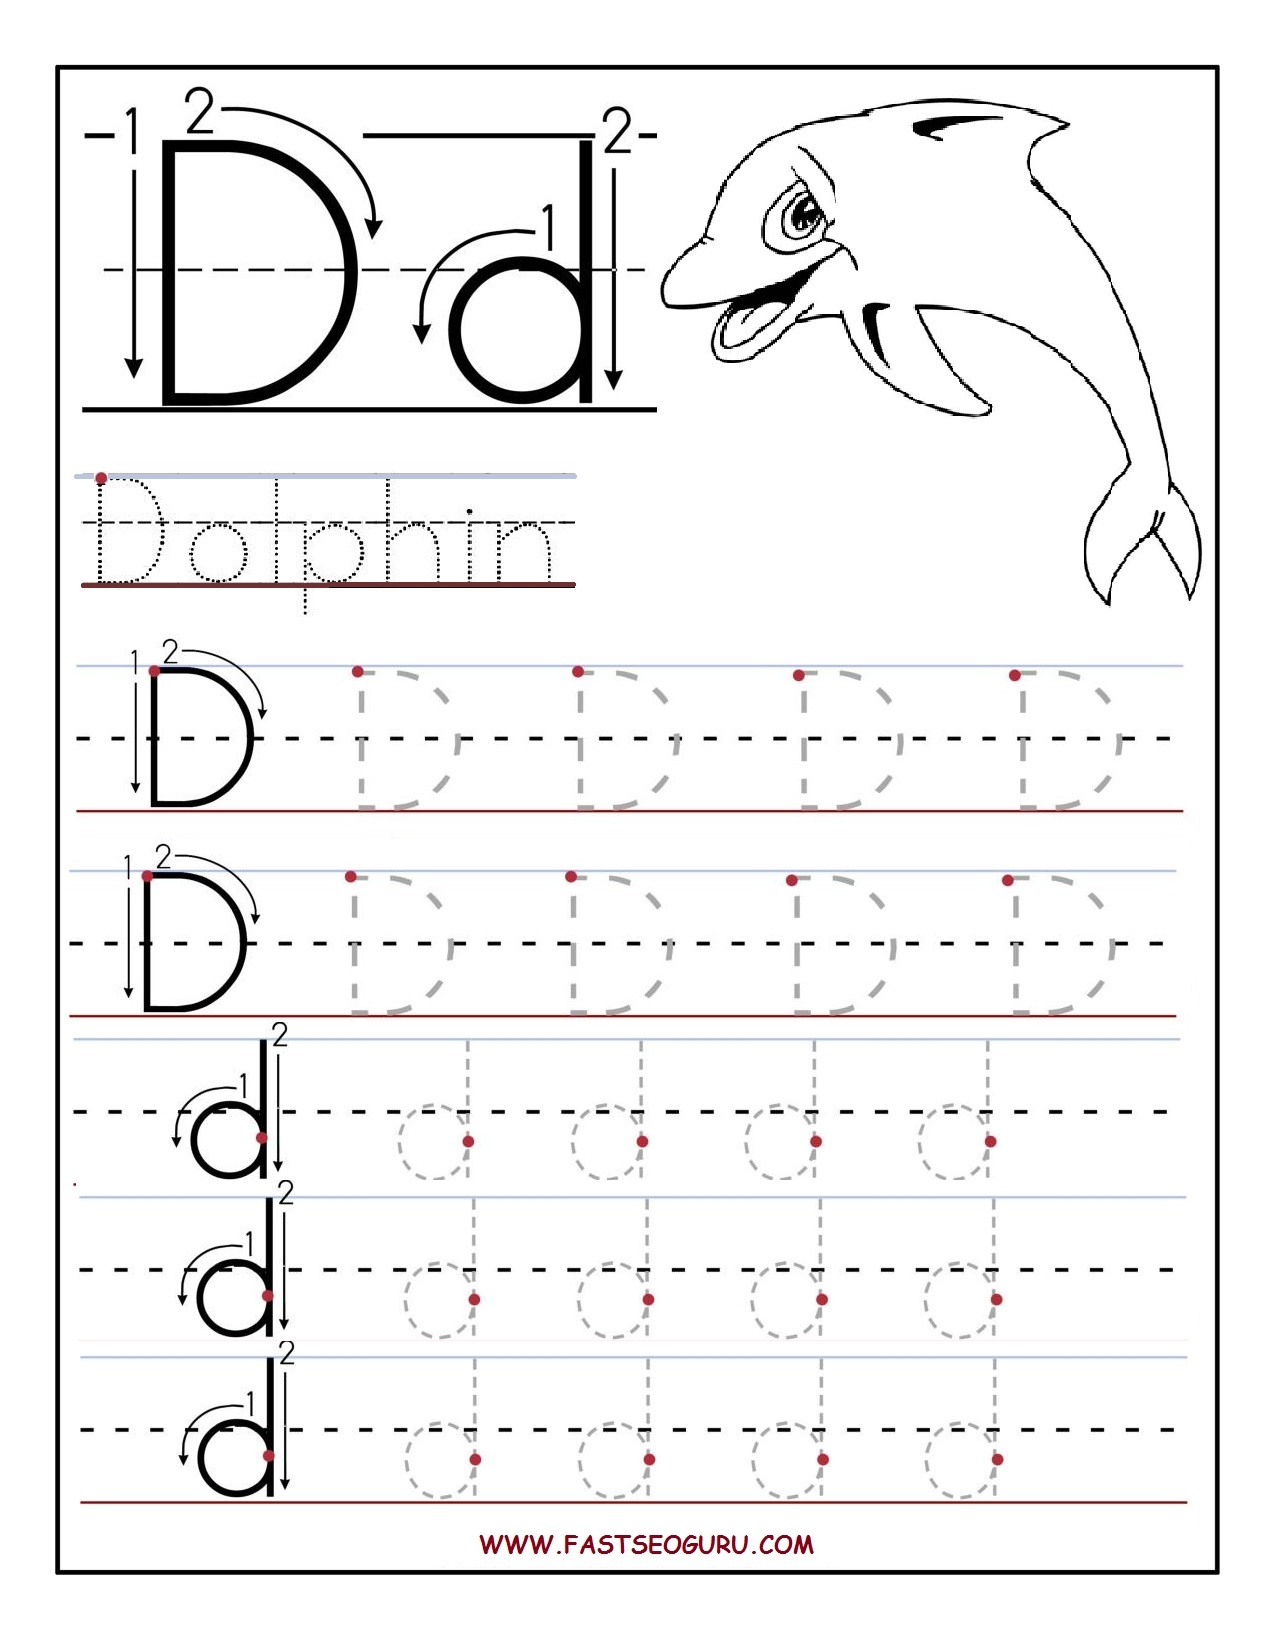 letter-tracing-search-results-calendar-2015